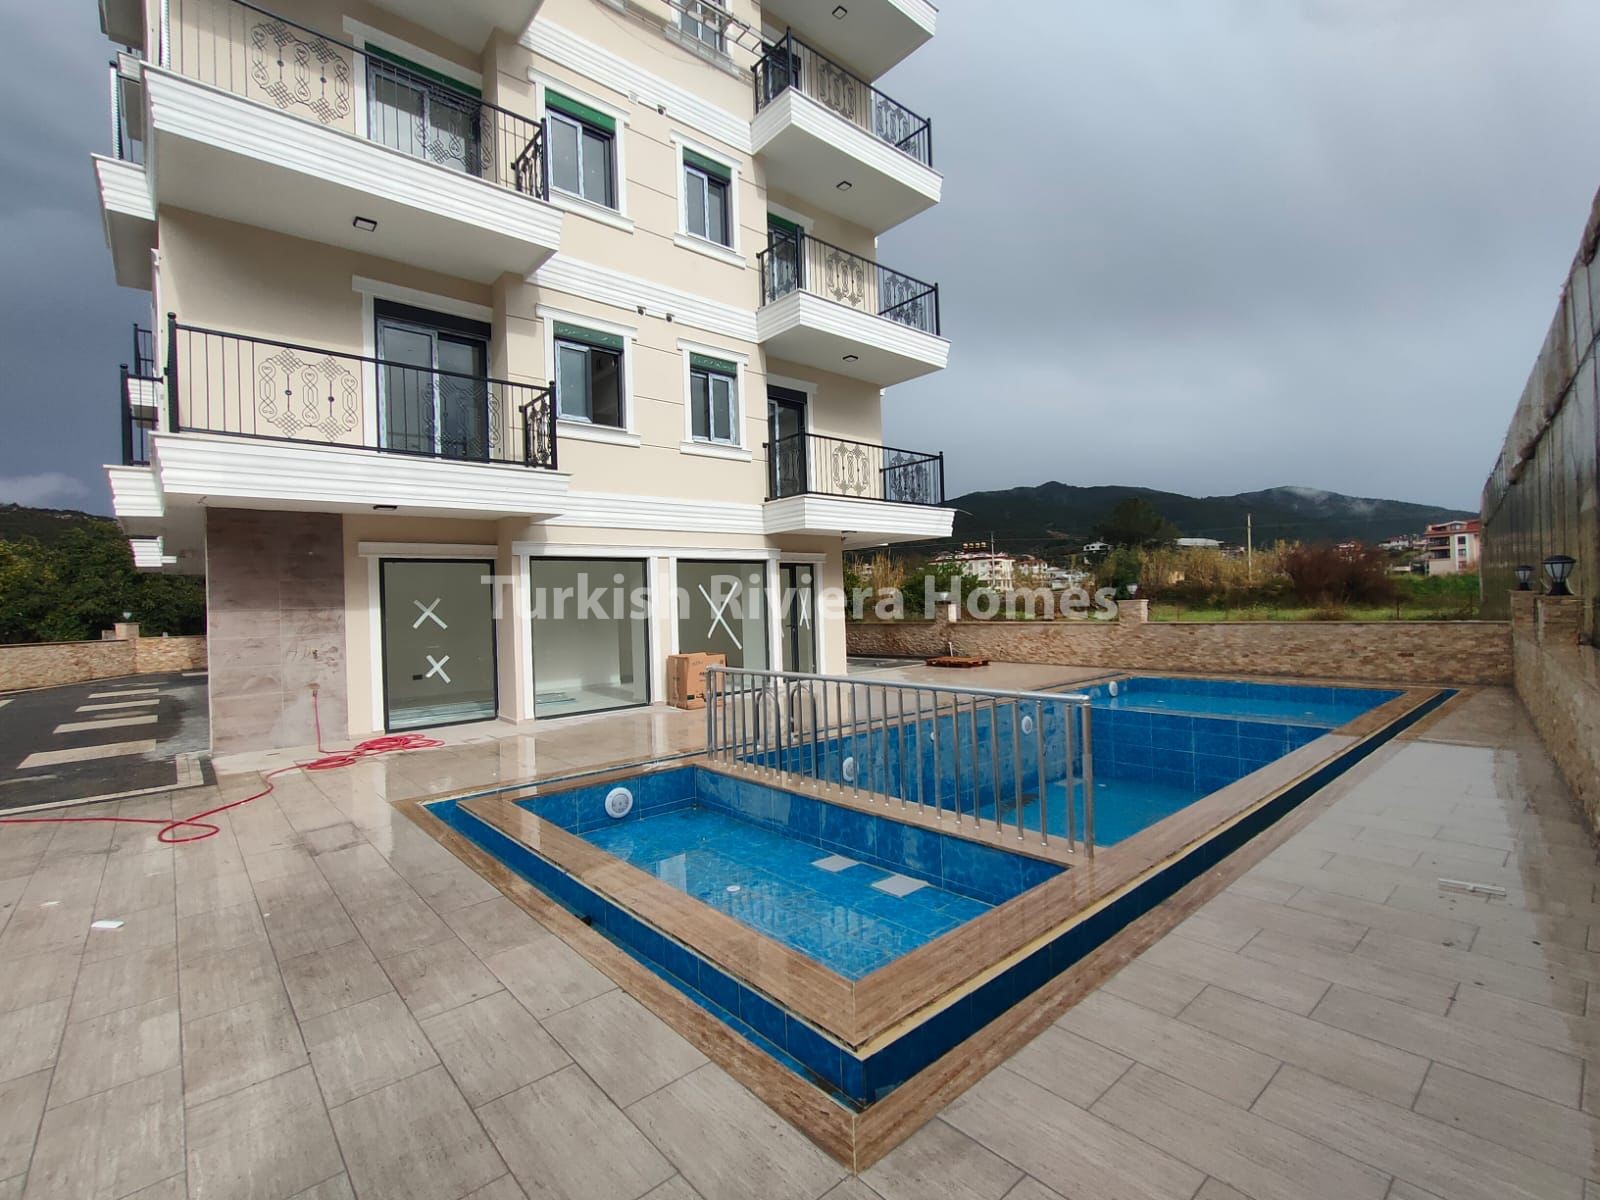 Brand New 1 Bedroom Apartment for Sale in Demirtaş